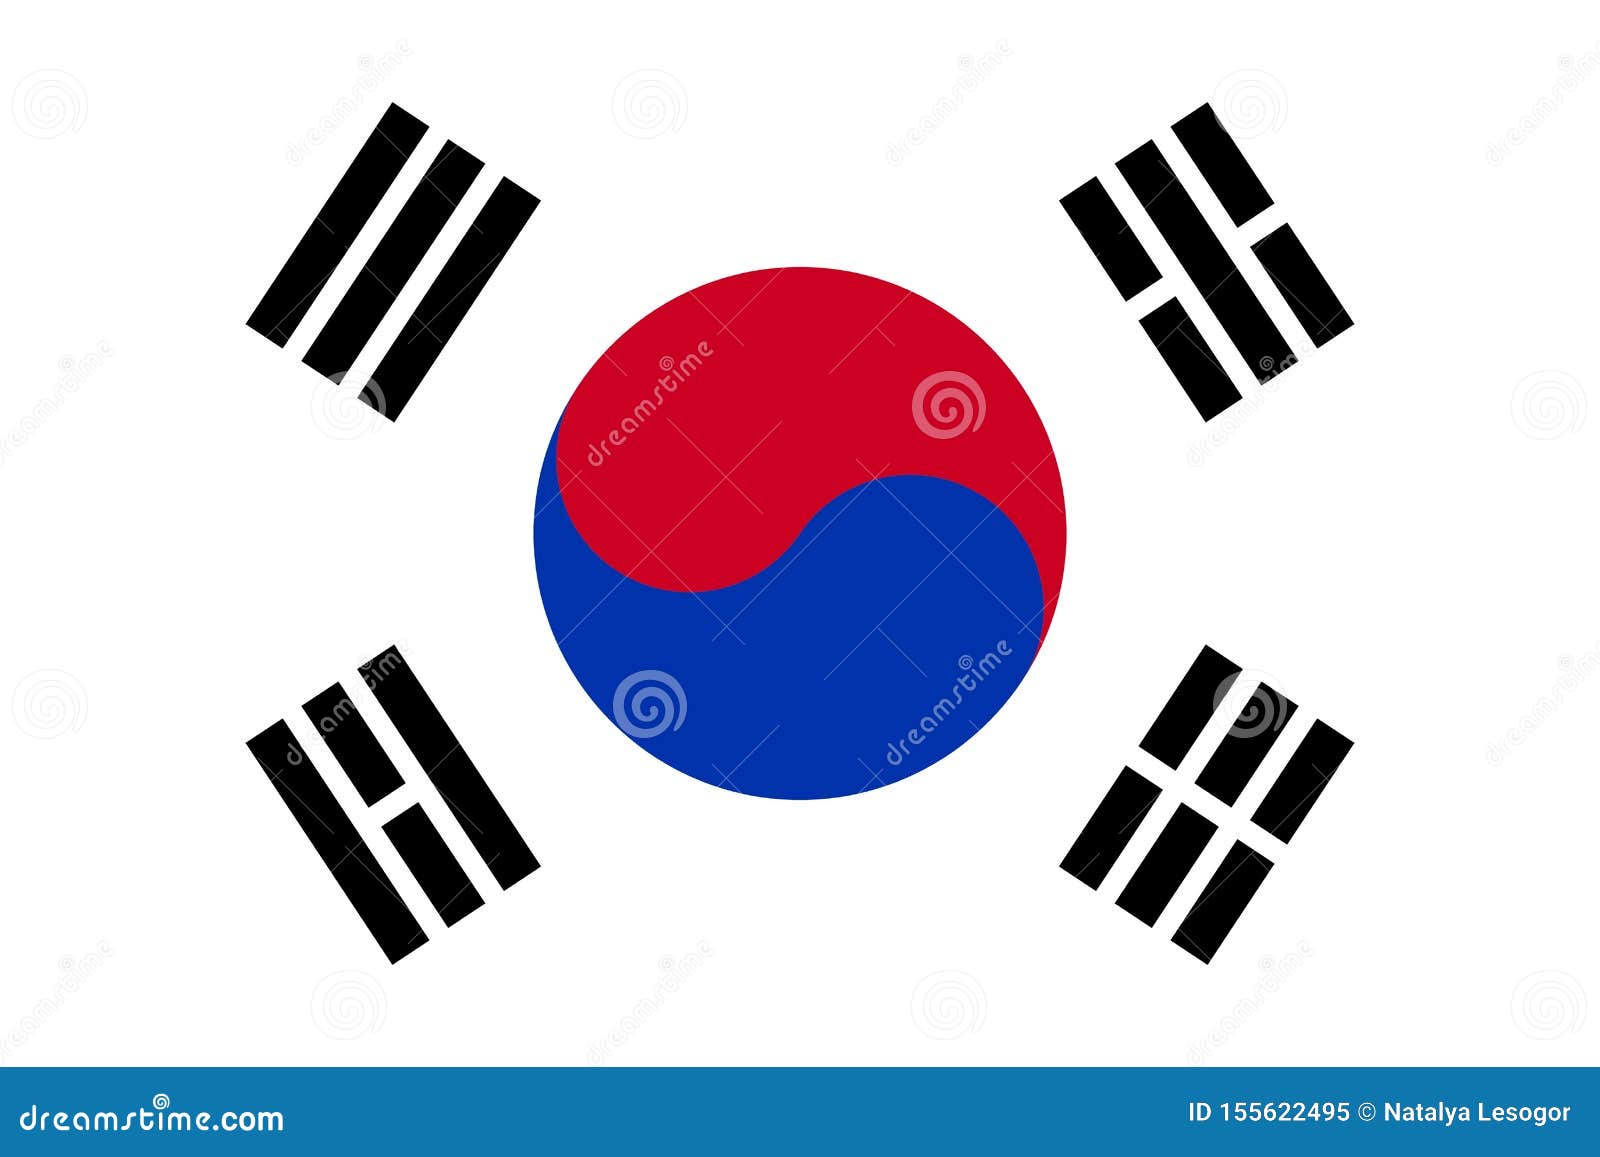 South Korea Flag Black Blue And Red Elements On White Background Stock Vector Illustration Of Icon Vector